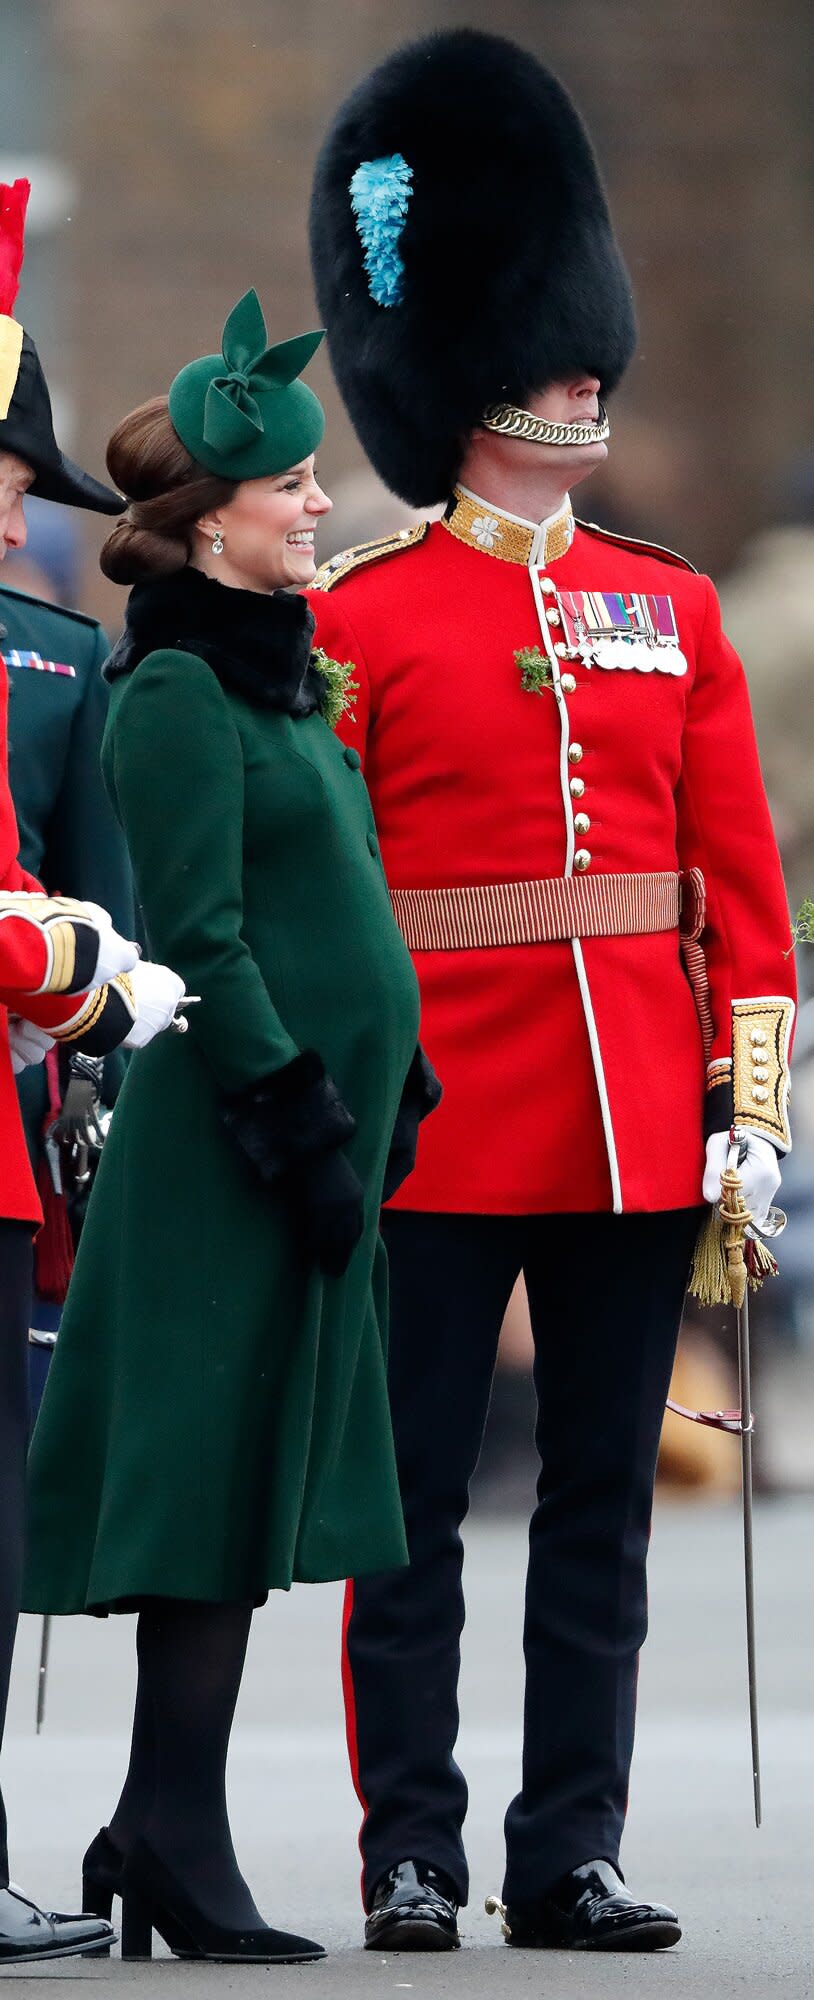 Catherine, Duchess of Cambridge presents sprigs of shamrock to soldiers of 1st Battalion Irish Guards during the annual Irish Guards St Patrick's Day Parade at Cavalry Barracks on March 17, 2018 in Hounslow, England.